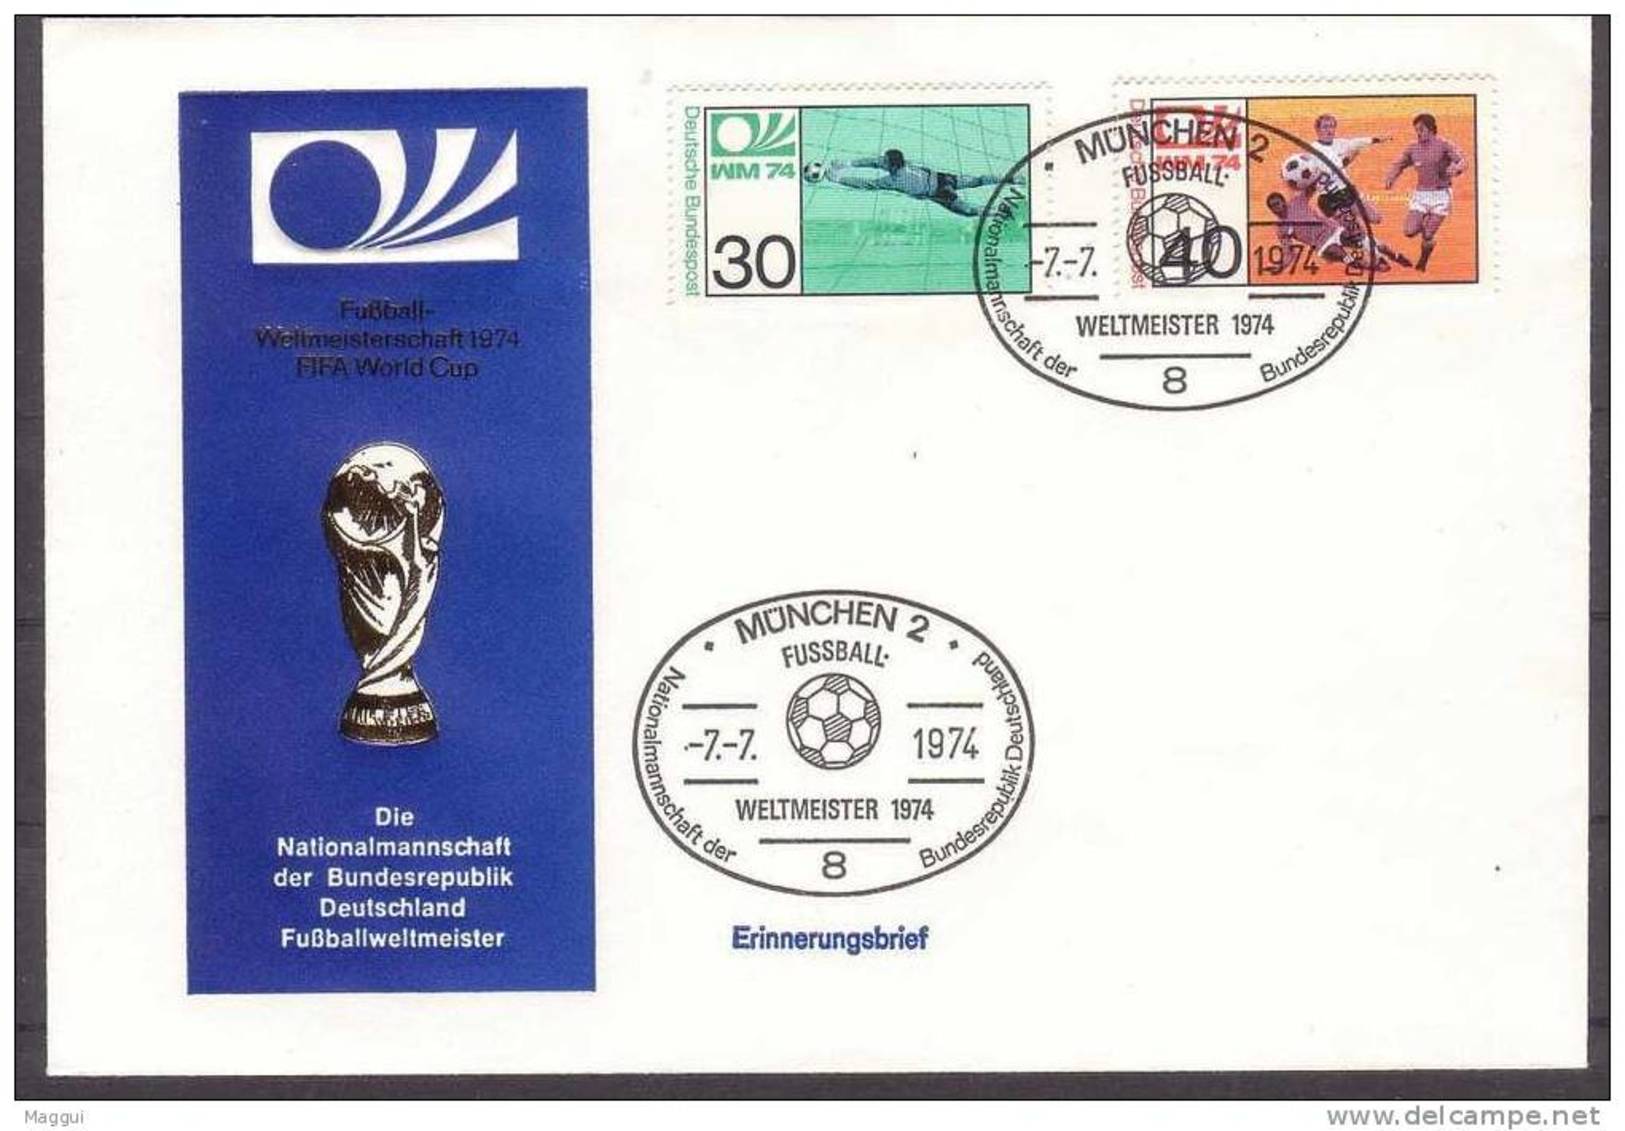 ALLEMAGNE  FDC  Cup  1974  Cachet MUNCHEN 2   Le 7 -7- 74  Football  Soccer  Fussball - 1974 – Alemania Occidental